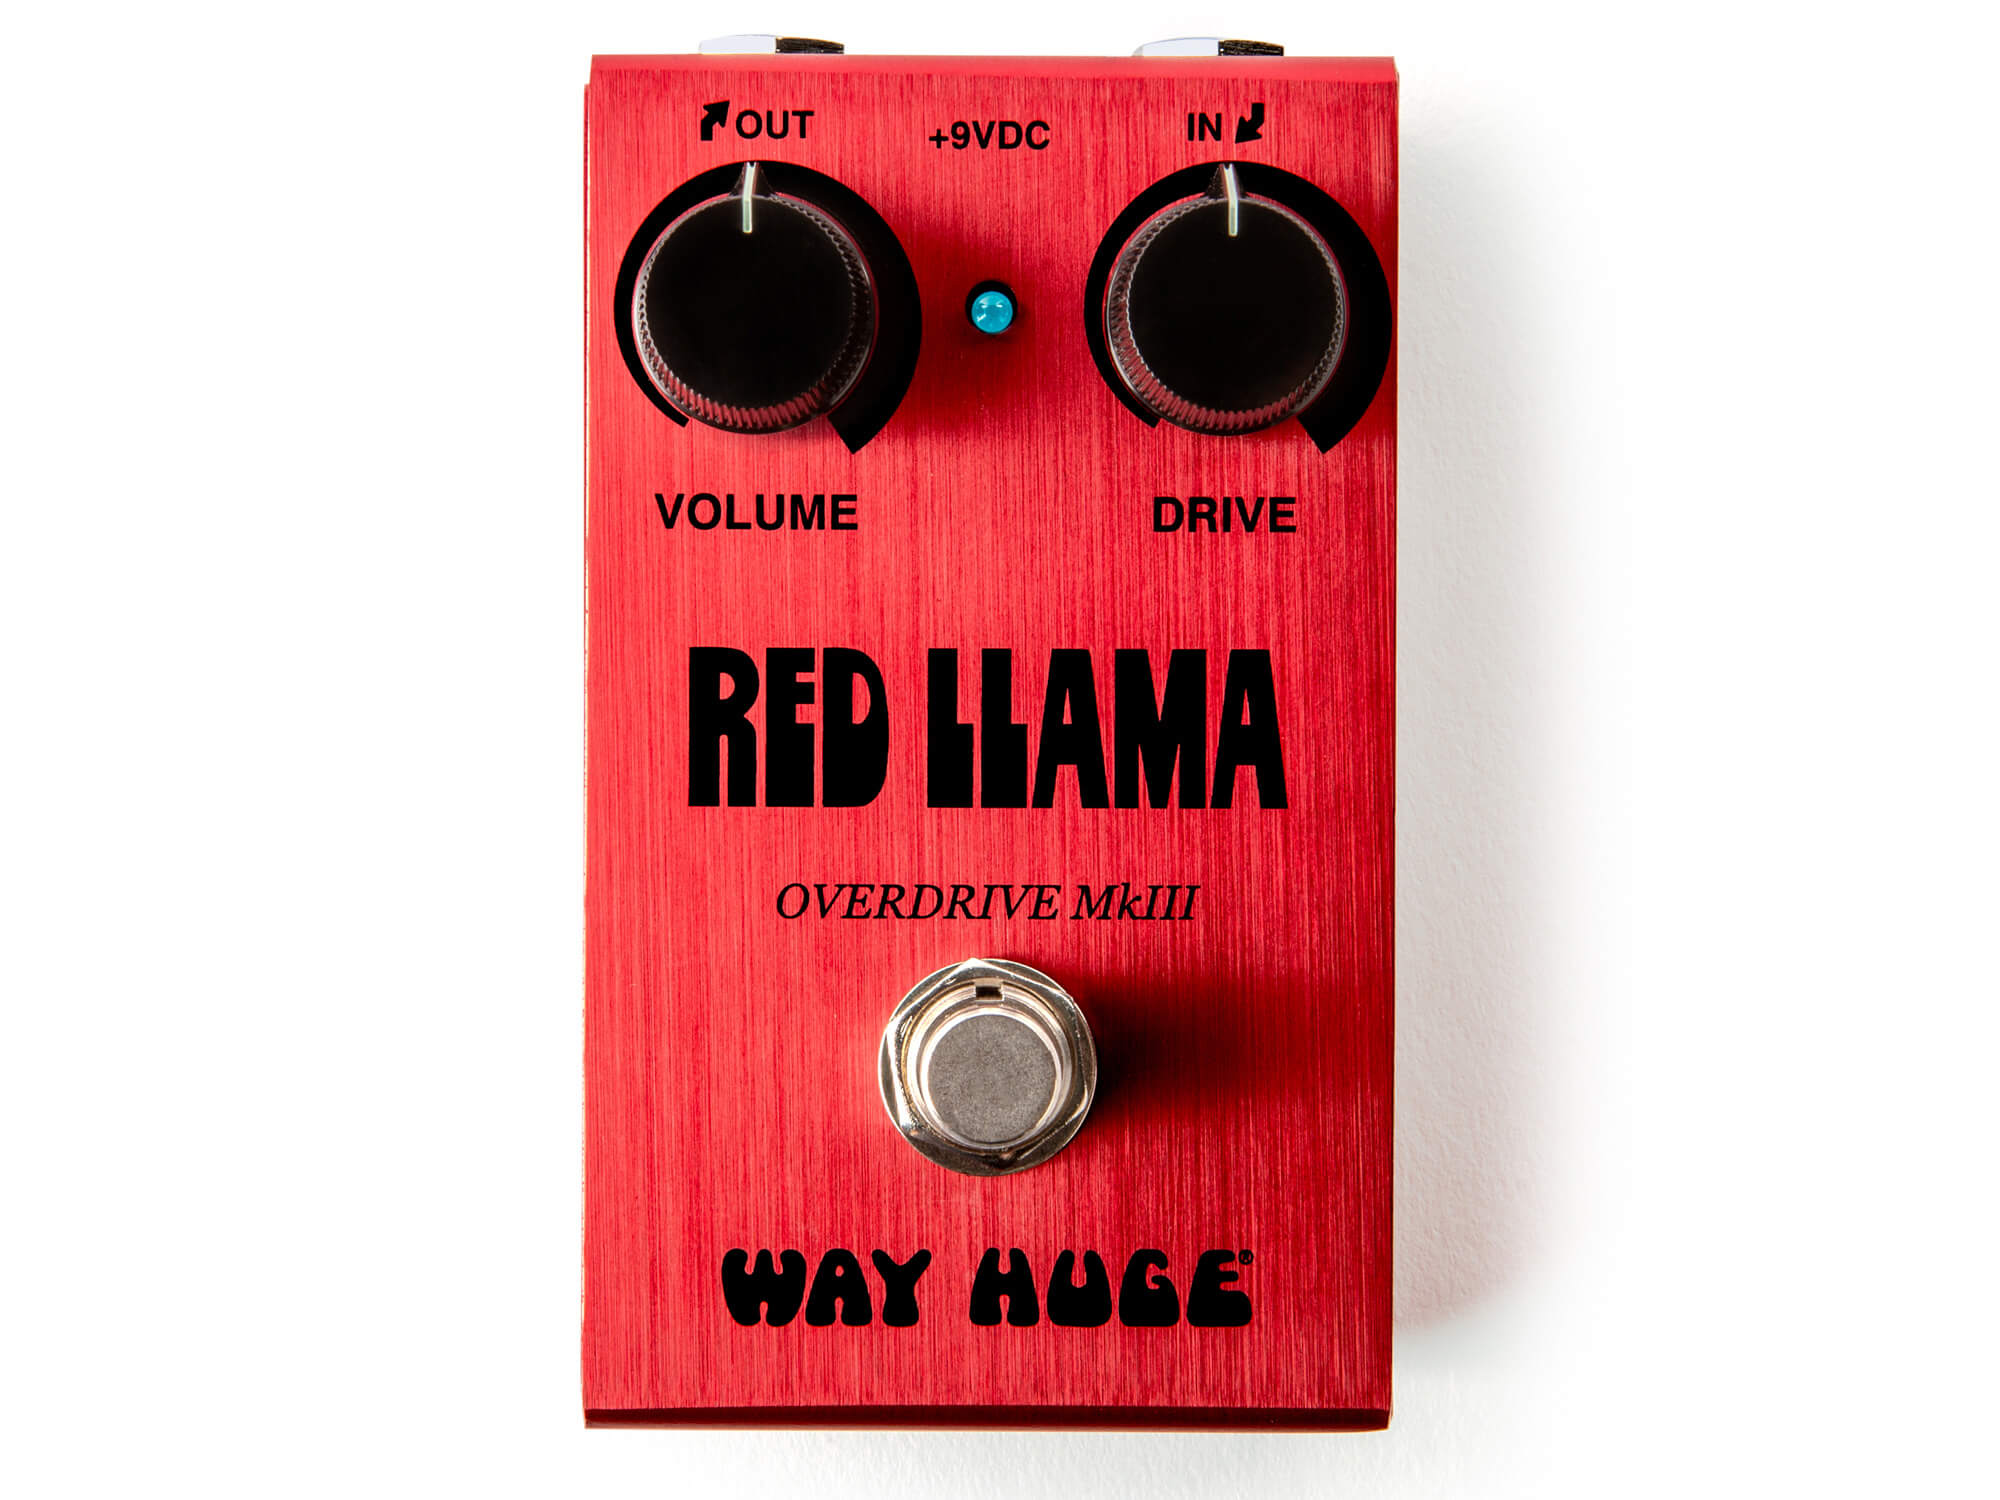 Way Huge goes way small with a compact Red Llama overdrive for its